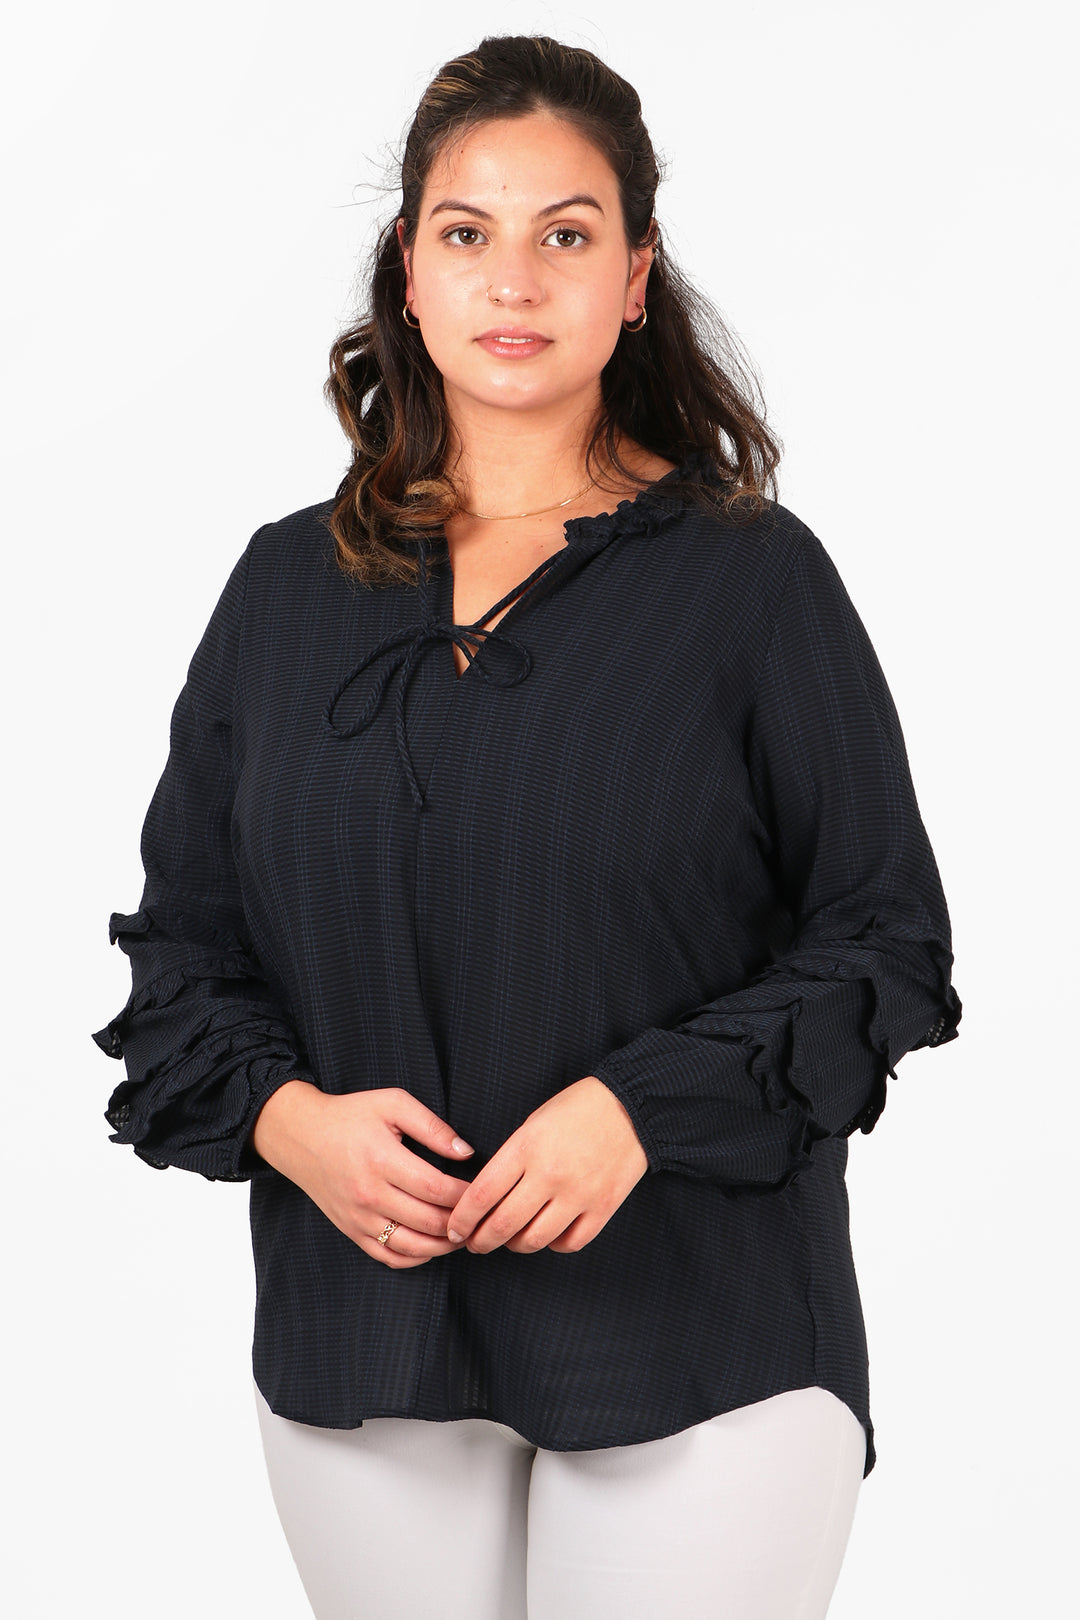 model wearing a navy blue long sleeved shirt with frill sleeves and a grandad collar